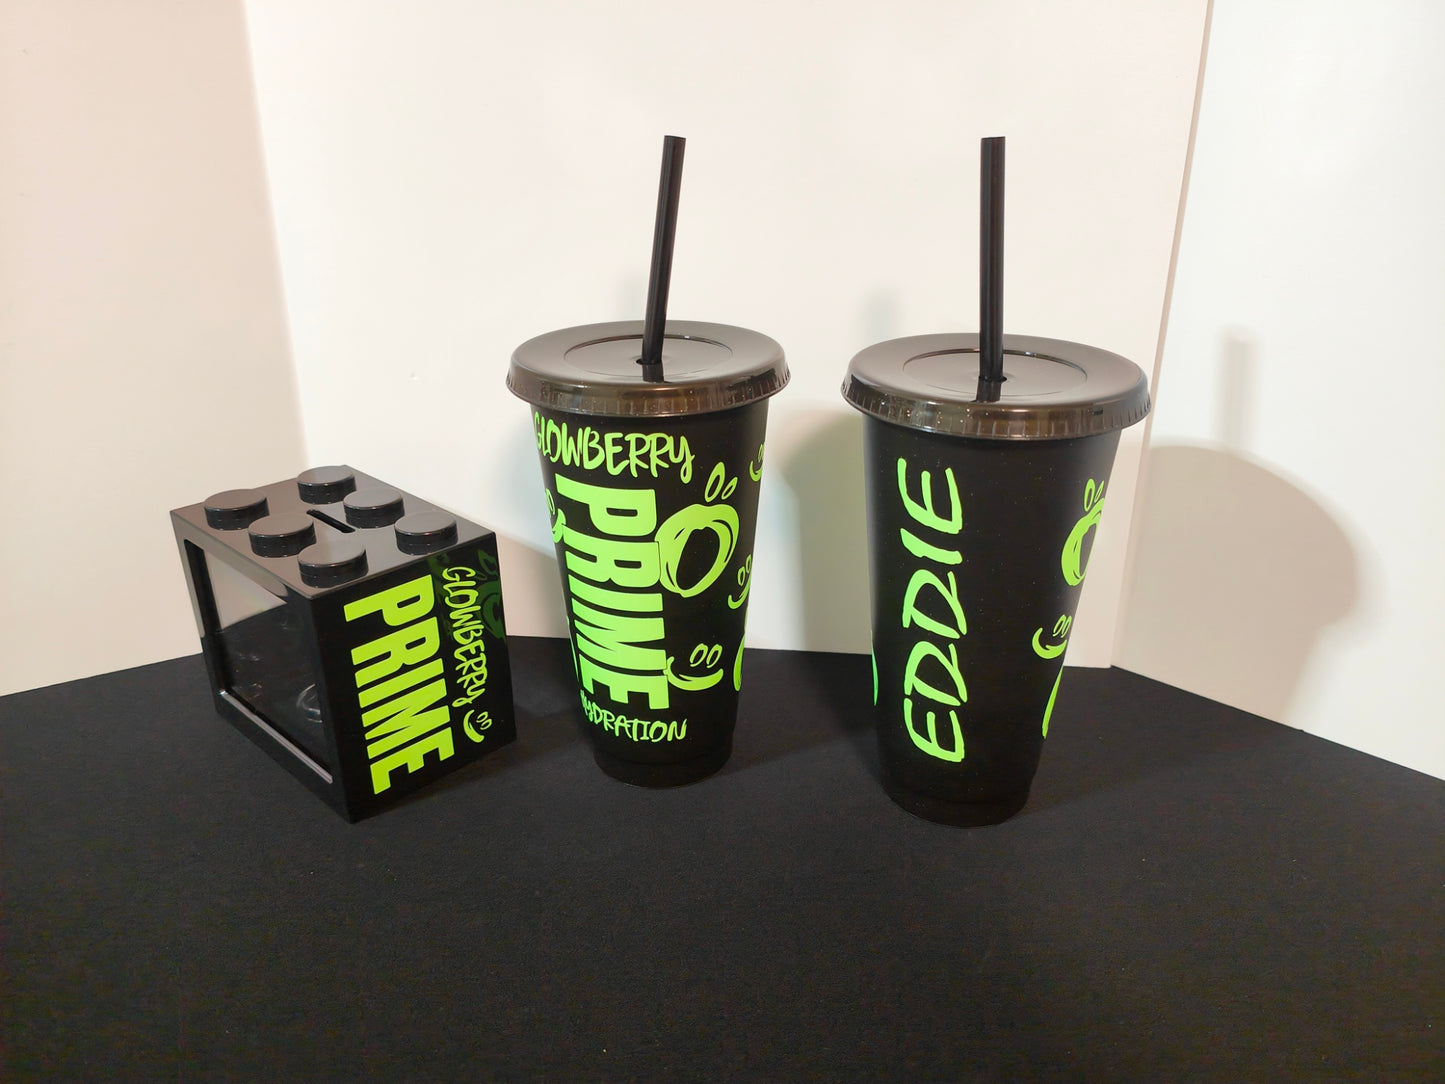 Prime Glowberry Cold Cups